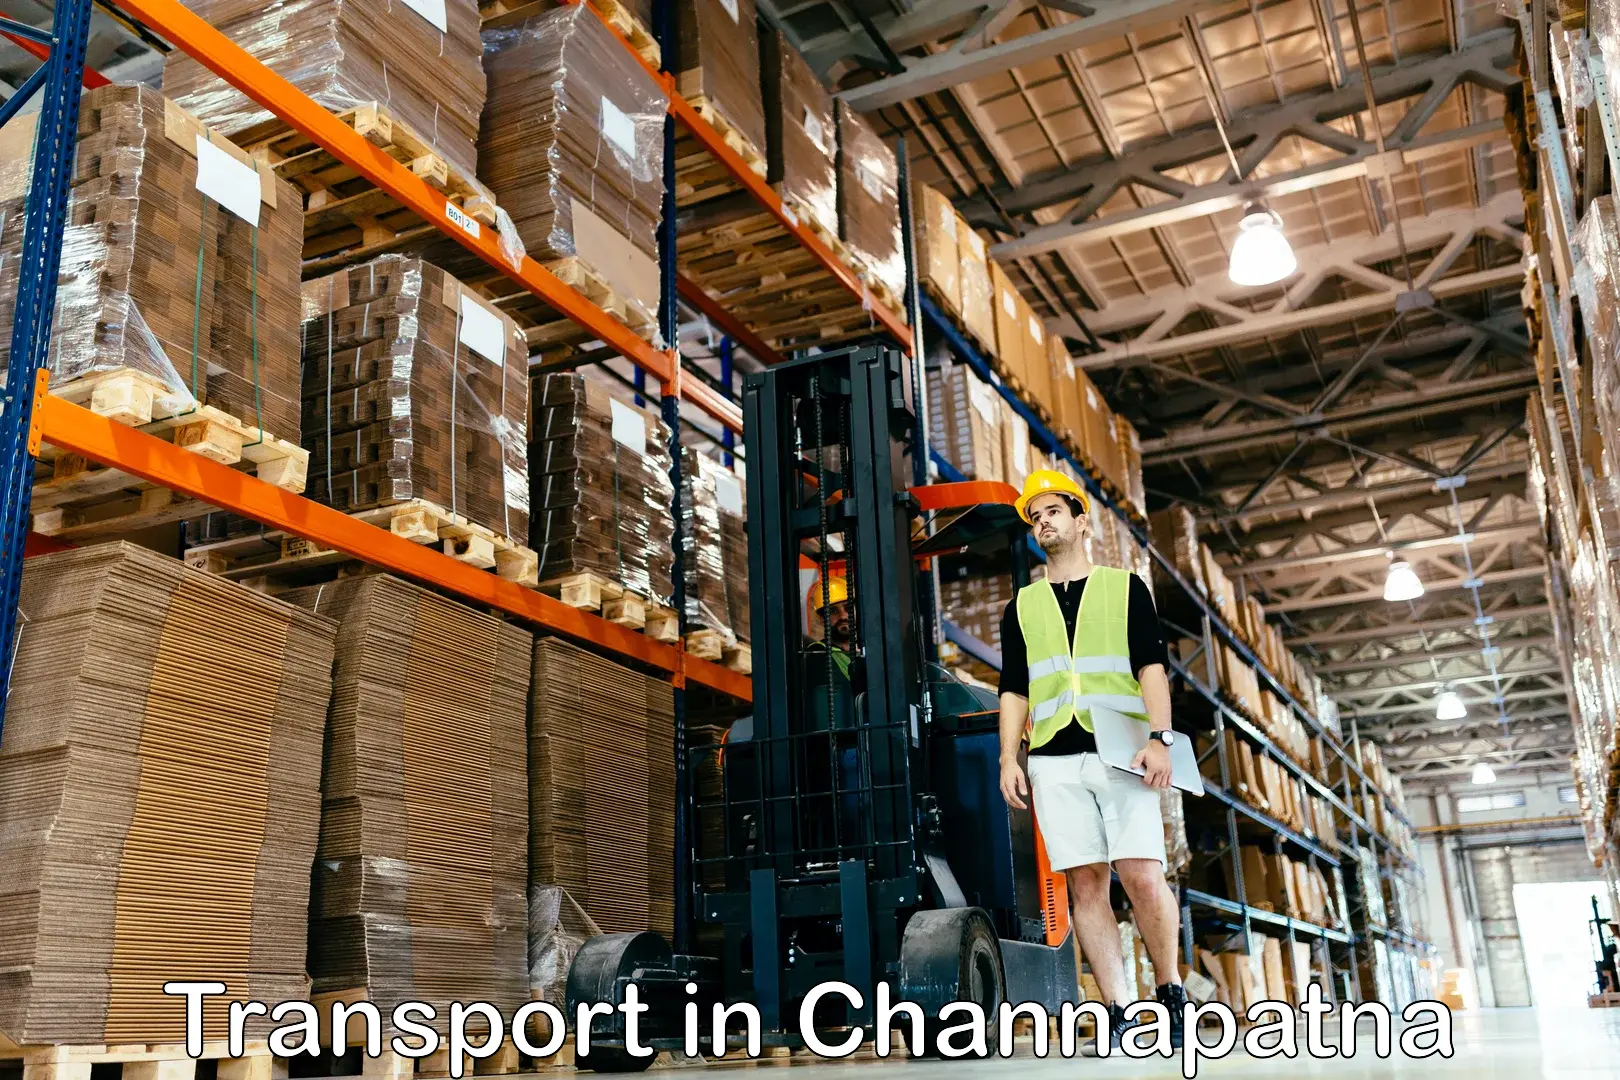 Cargo train transport services in Channapatna